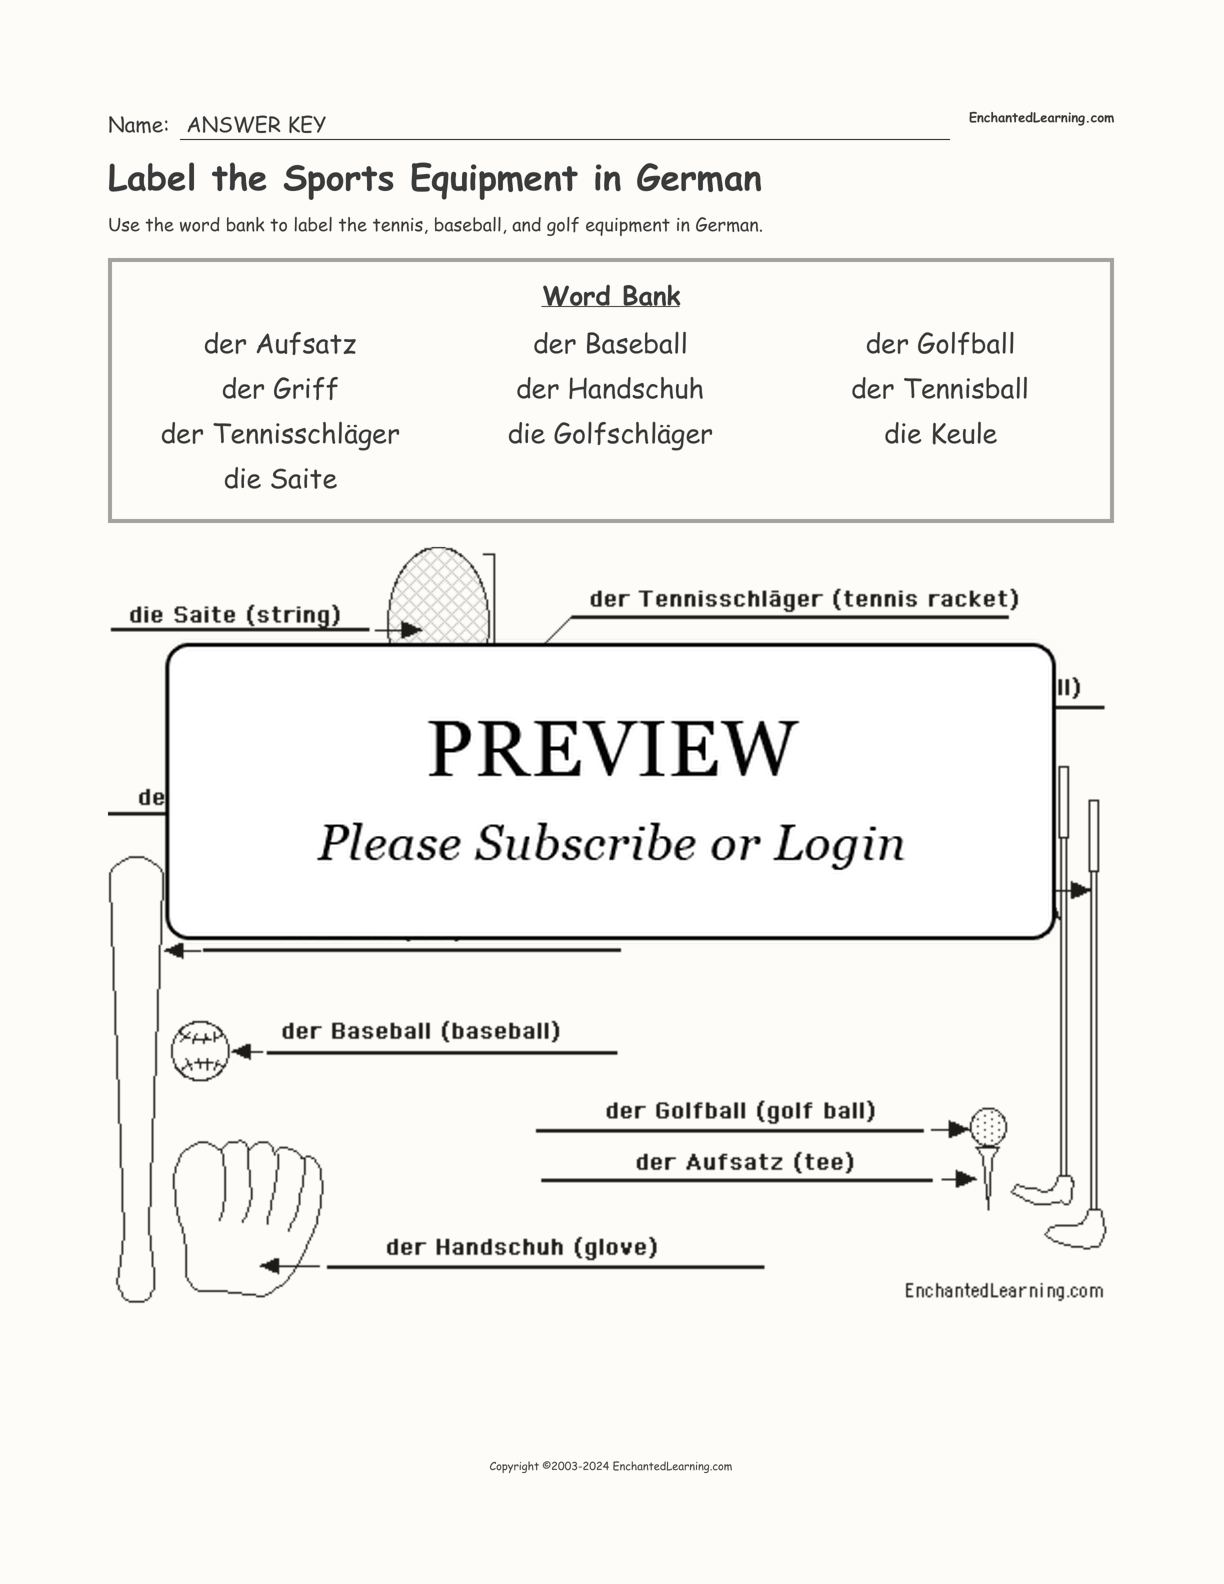 Label the Sports Equipment in German interactive worksheet page 2